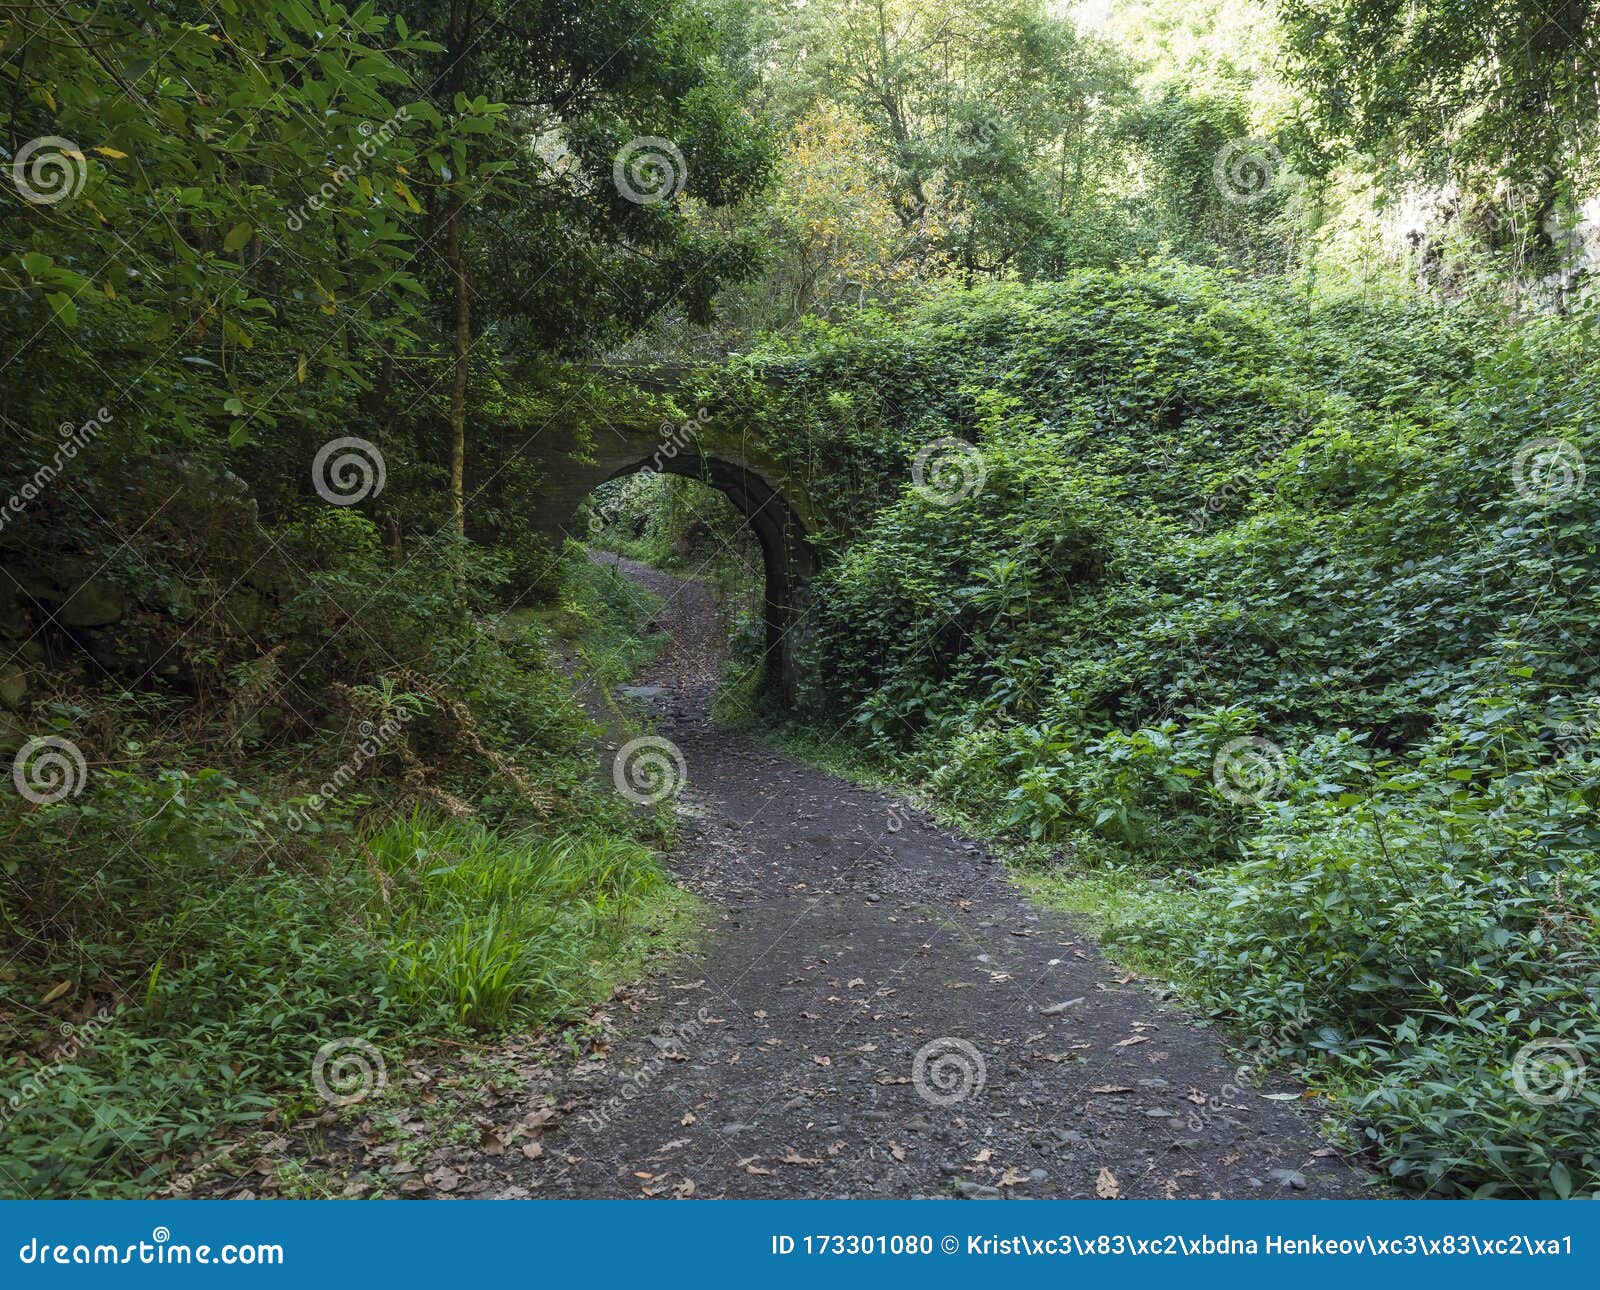 old stone aqueduct, water duct arc at cubo de la galga nature park, path in beautiful mysterious laurel forest